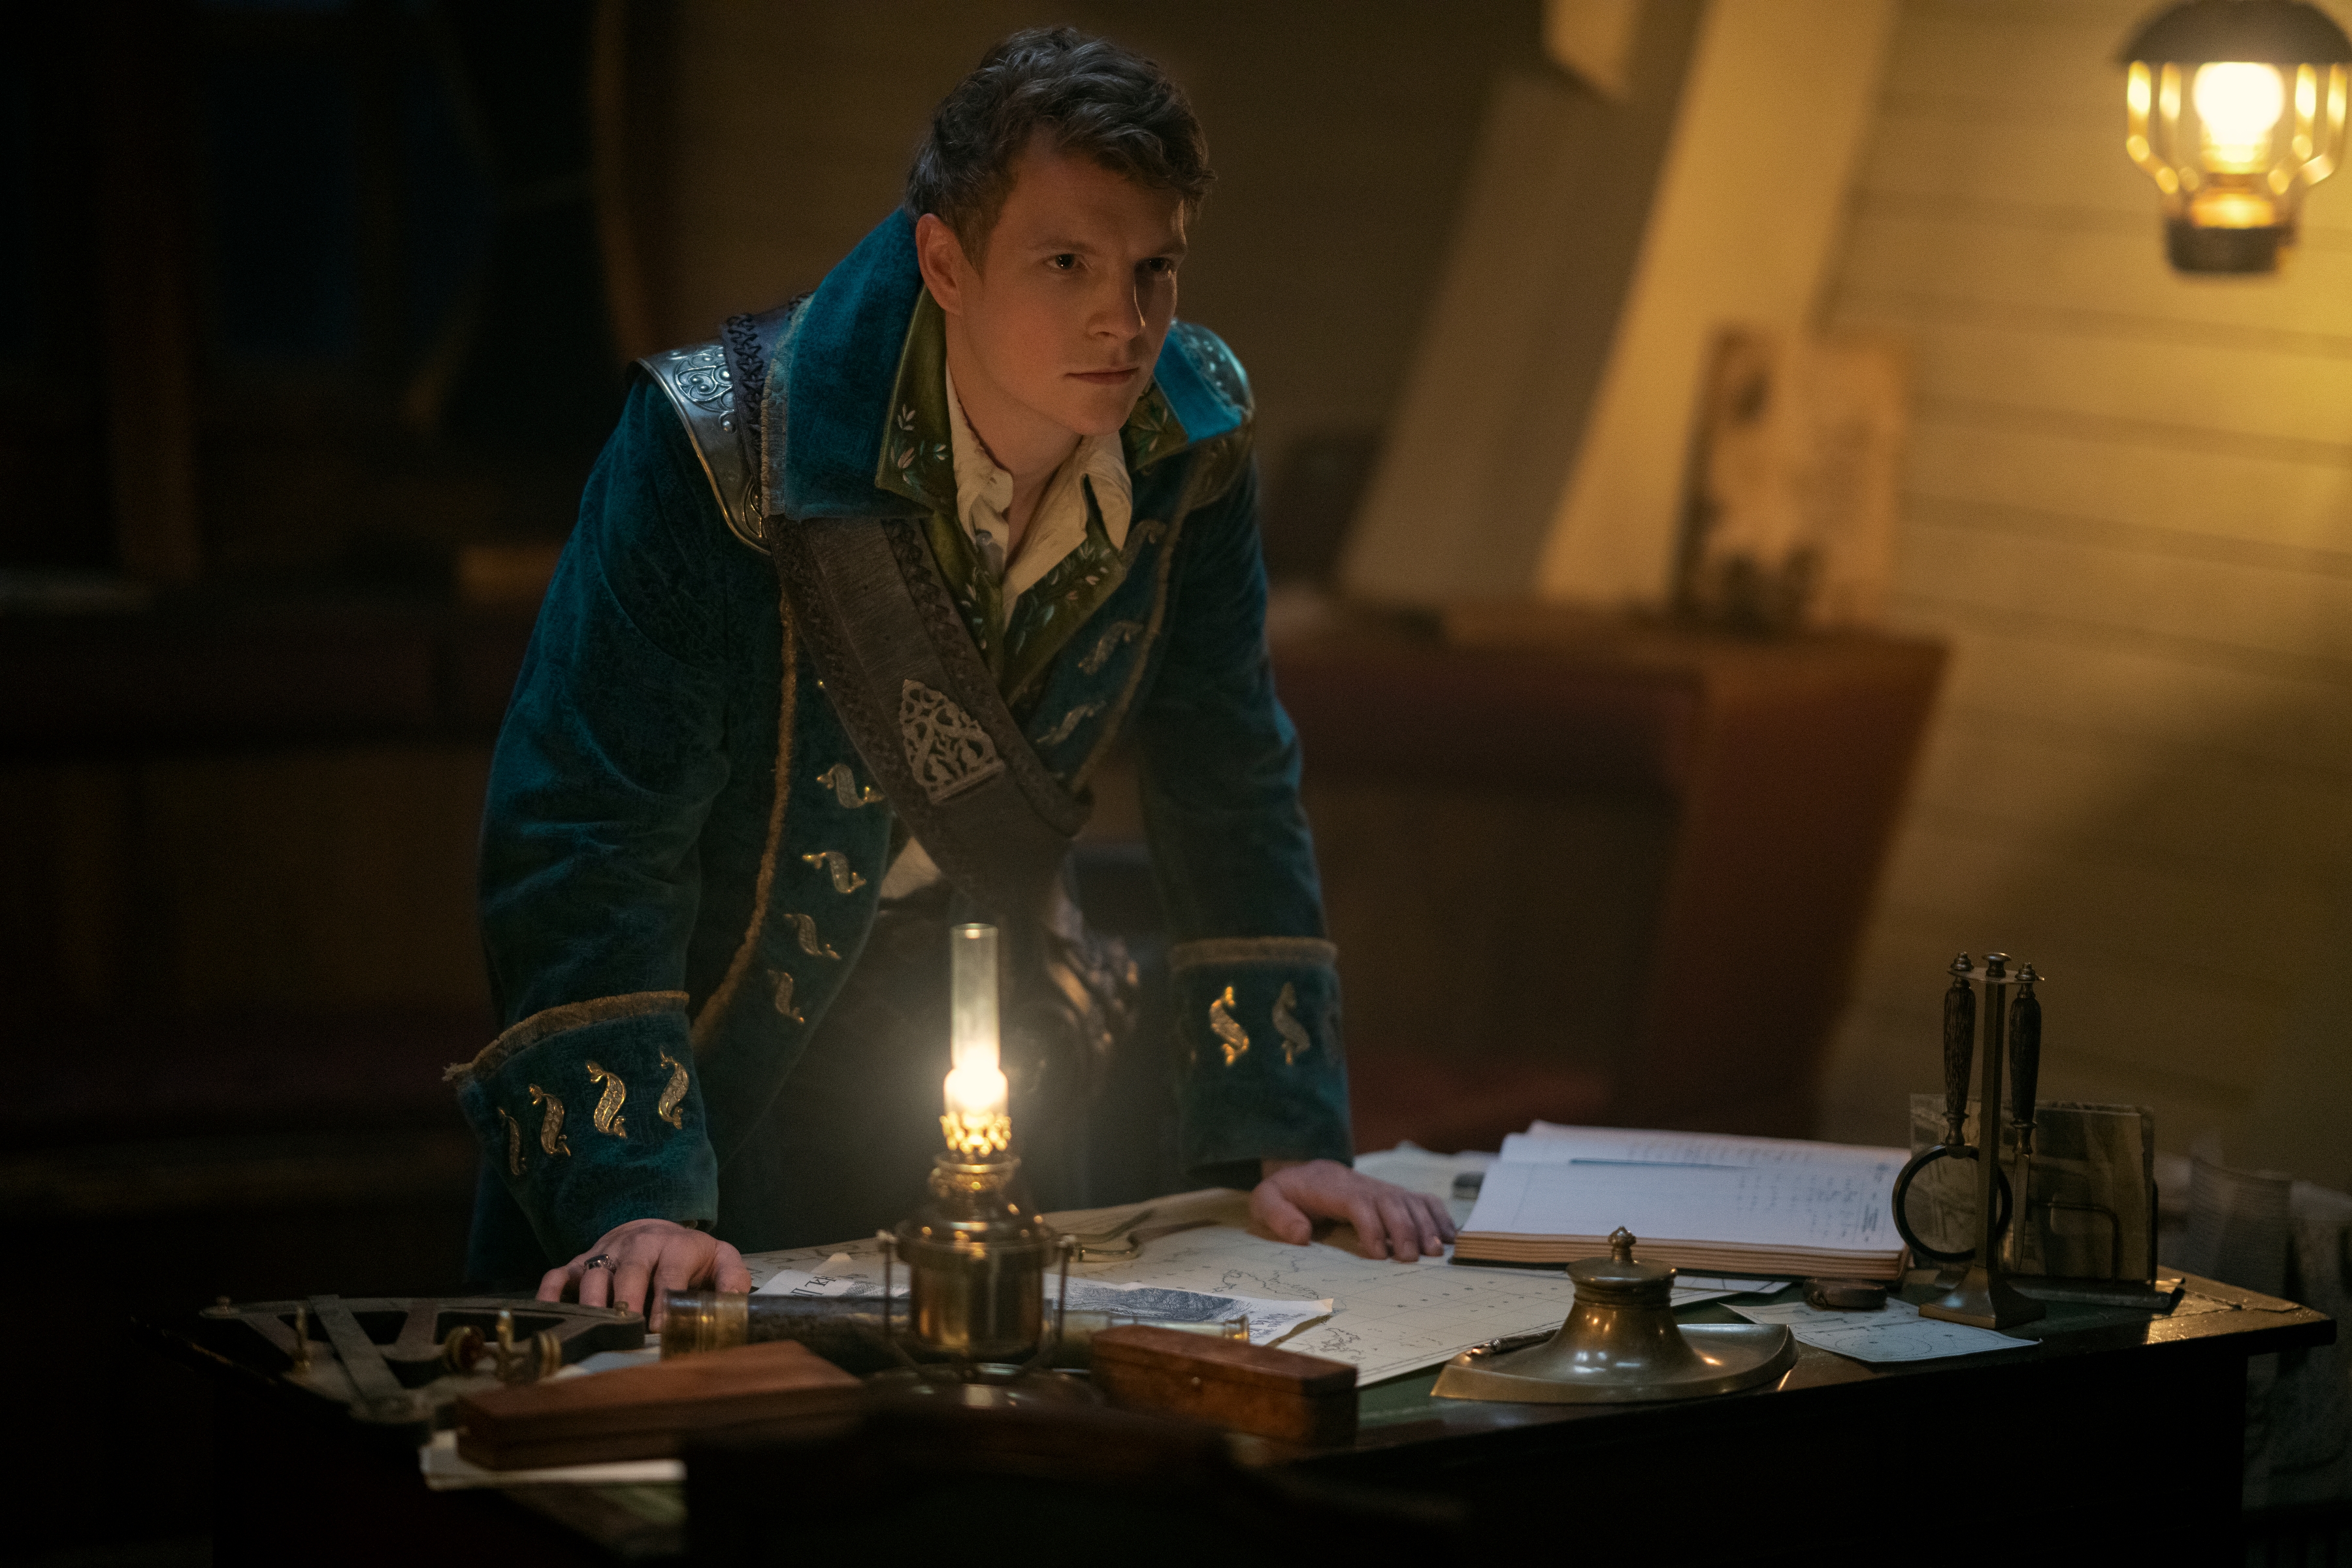 In a a still from Shadow and Bone season 2, Patrick Gibson as Sturmhond leans forward with his hands resting on a cluttered desk in his ship’s cabin.